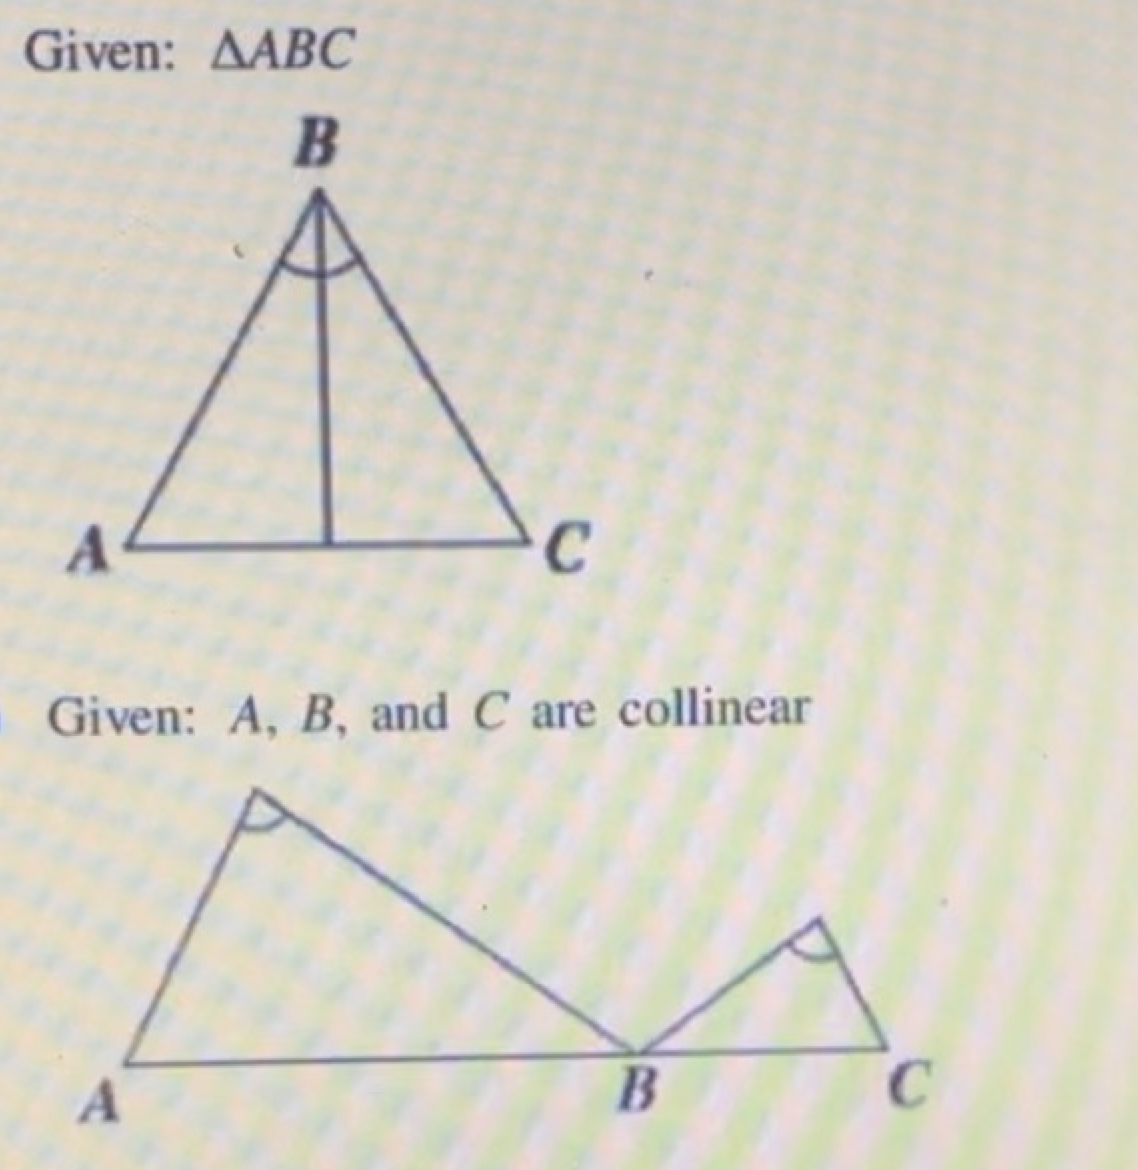 Given: AABC
B
A
Given: A, B, and C are collinear
A
C
